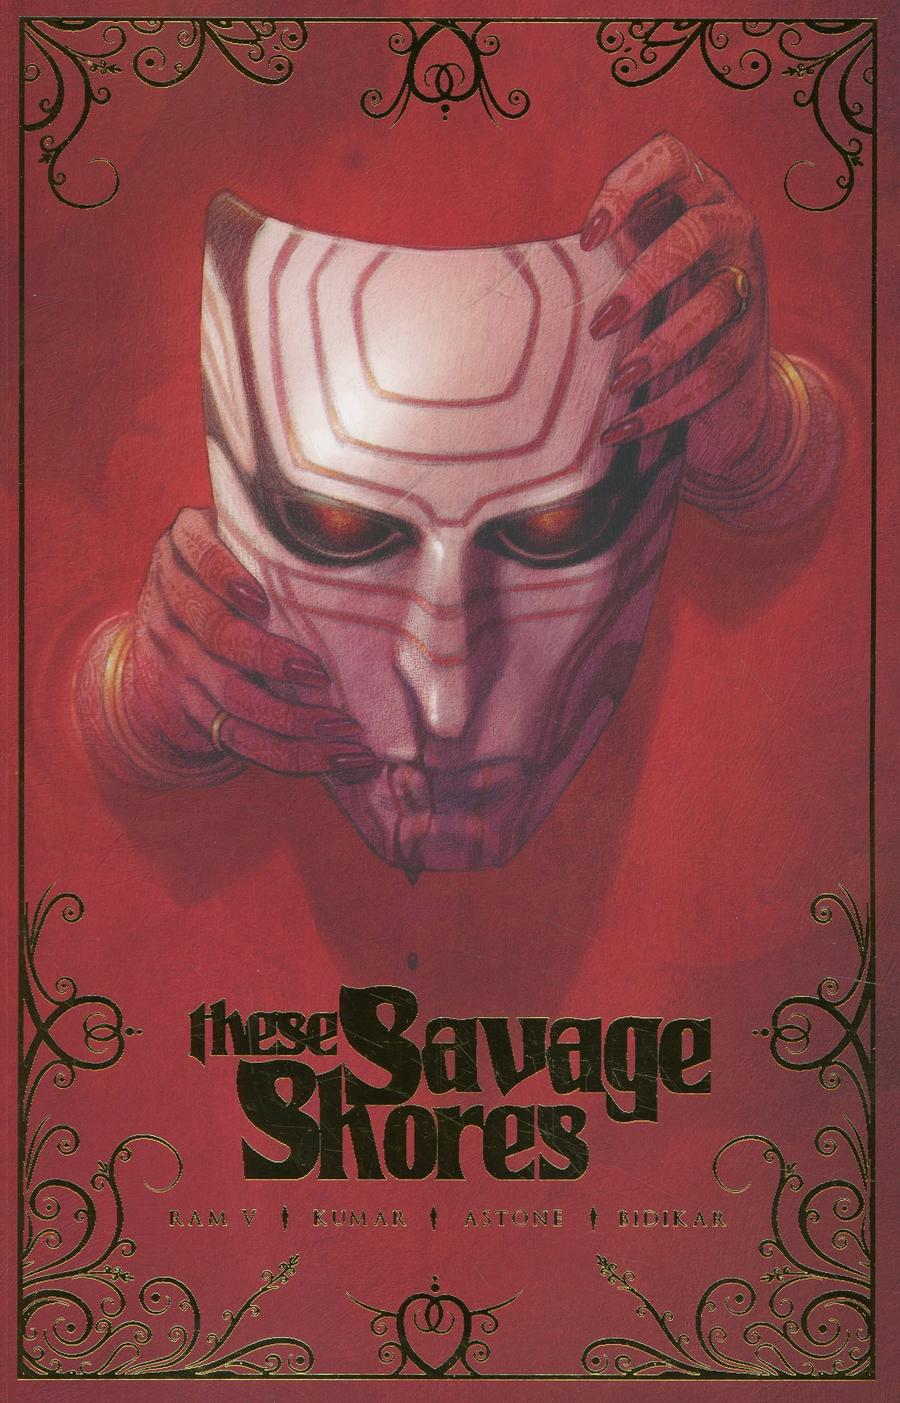 LCSD 2019 These Savage Shores Vol 1 TP Gold Edition